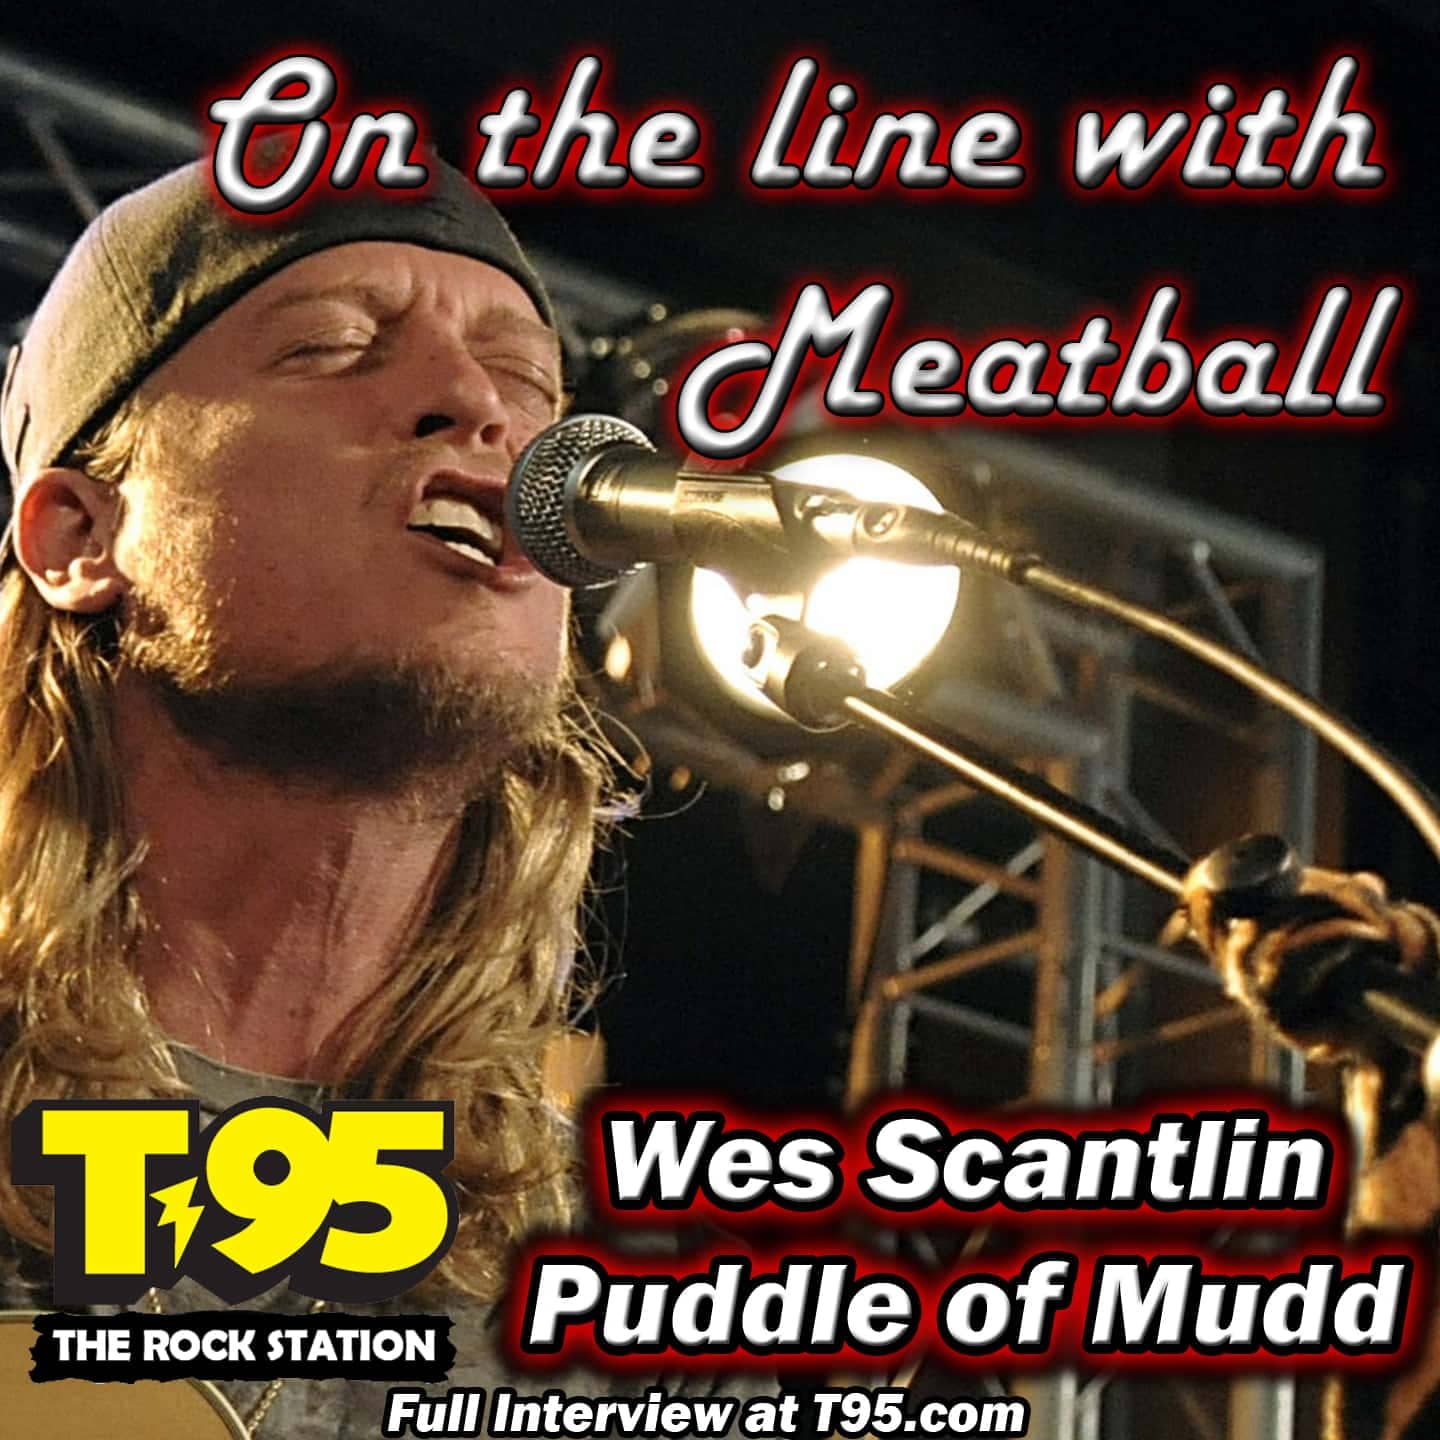 on-the-line-with-wes-scantlin-insta